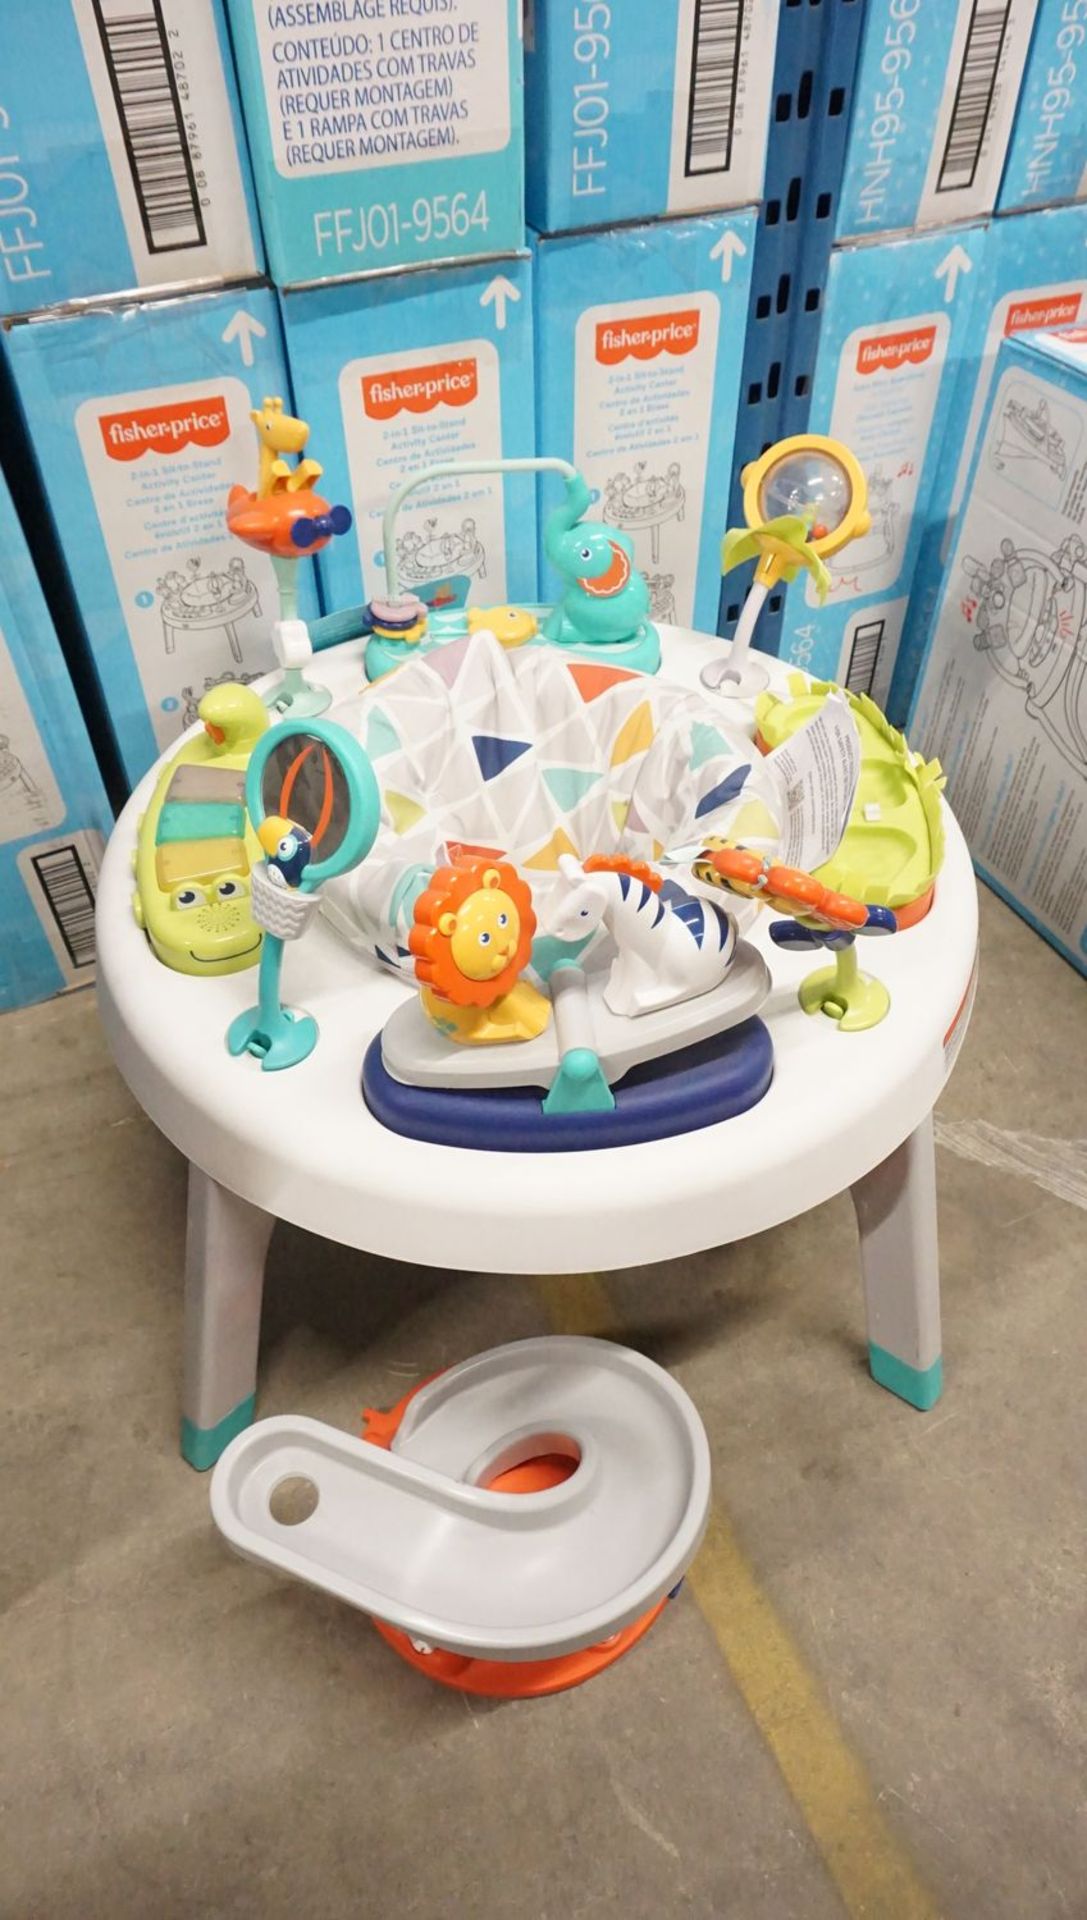 FISHER PRICE 2-IN-1 SIT & STAND ACTIVITY CENTRE (FFJ01-9564) (MSRP 129.99) - Image 3 of 3